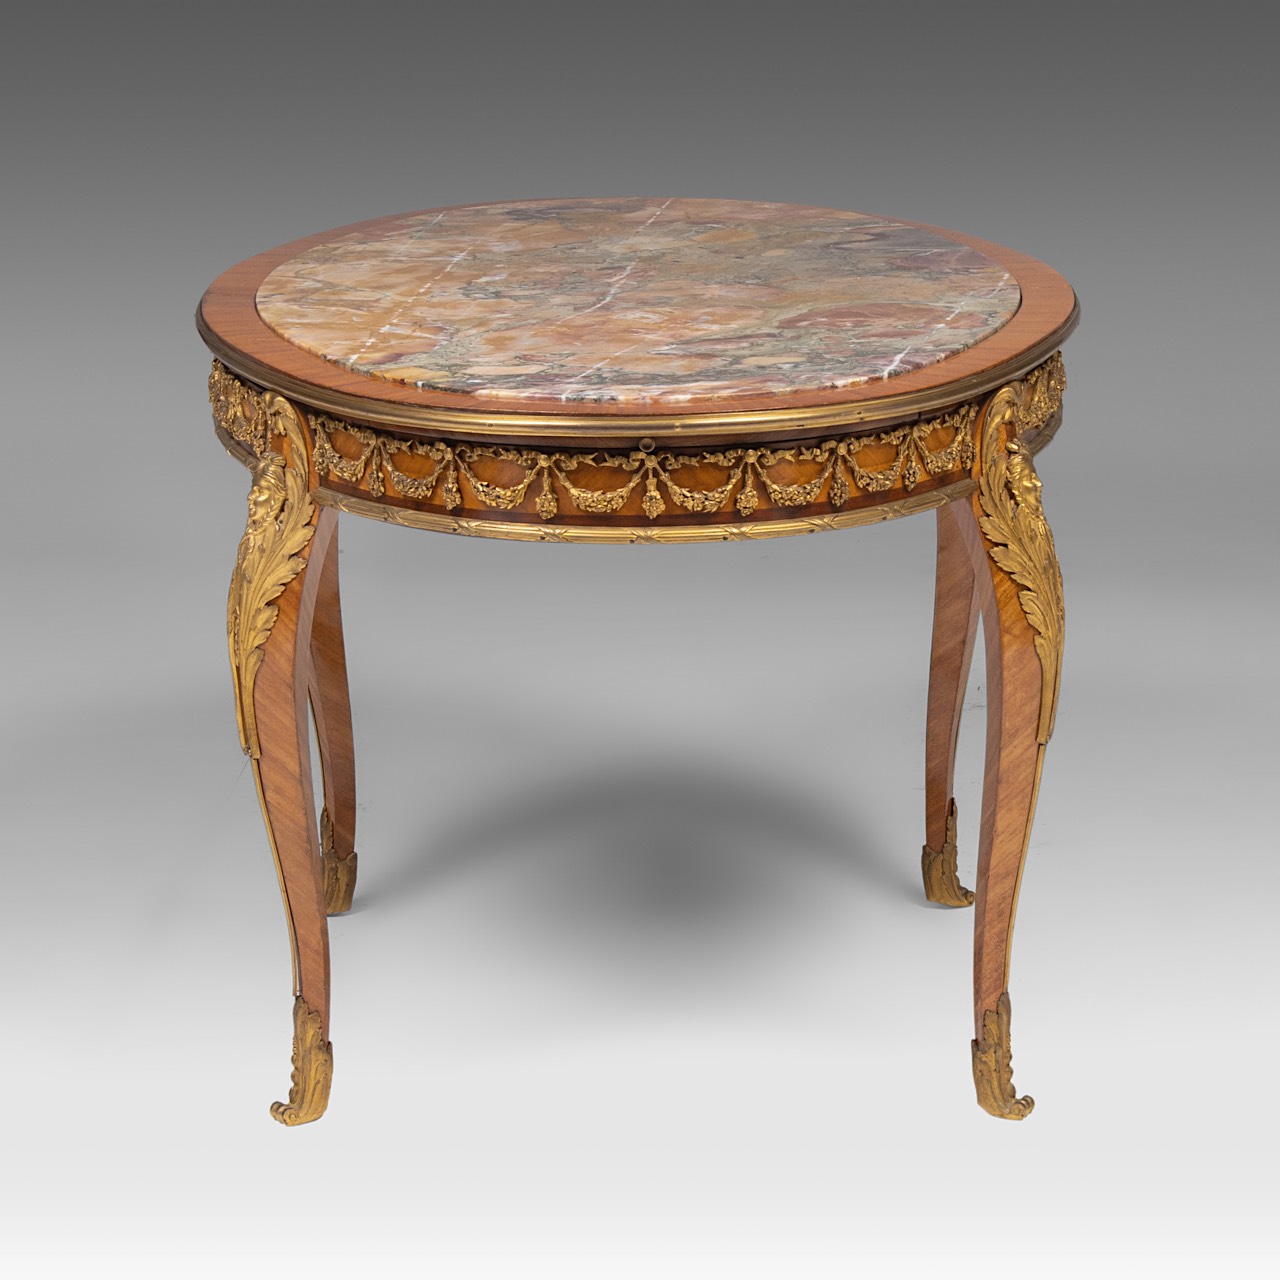 A mahogany marble-topped transitional-style side table with gilt bronze mounts, H 58 cm - W 100 cm - - Image 5 of 7